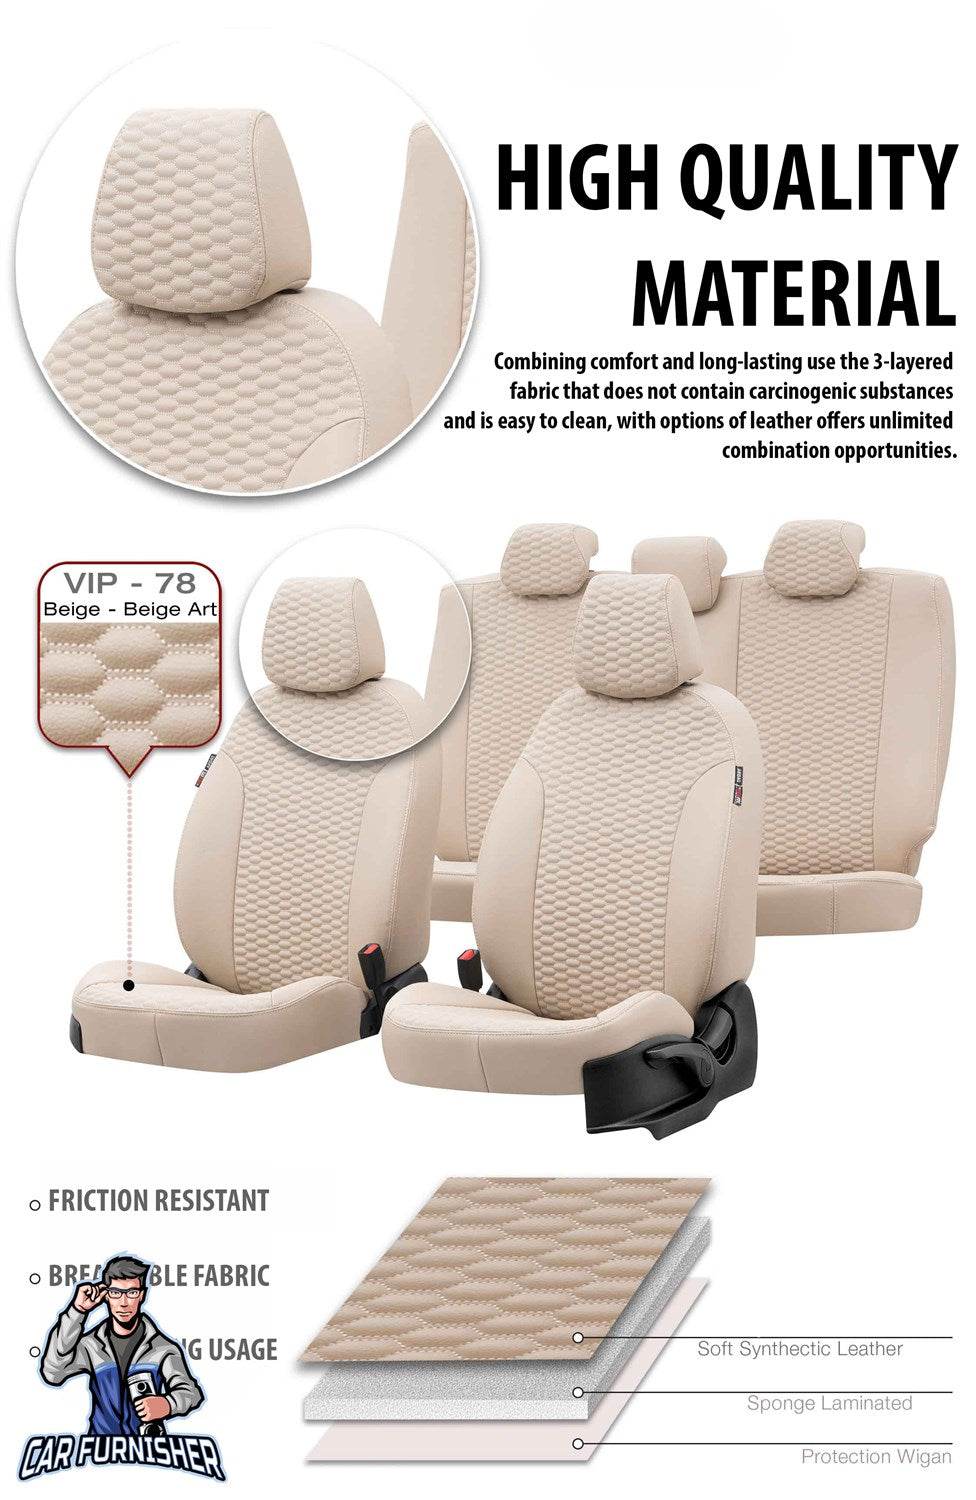 Nissan NV300 Seat Cover Madrid Foal Feather Design Smoked Leather